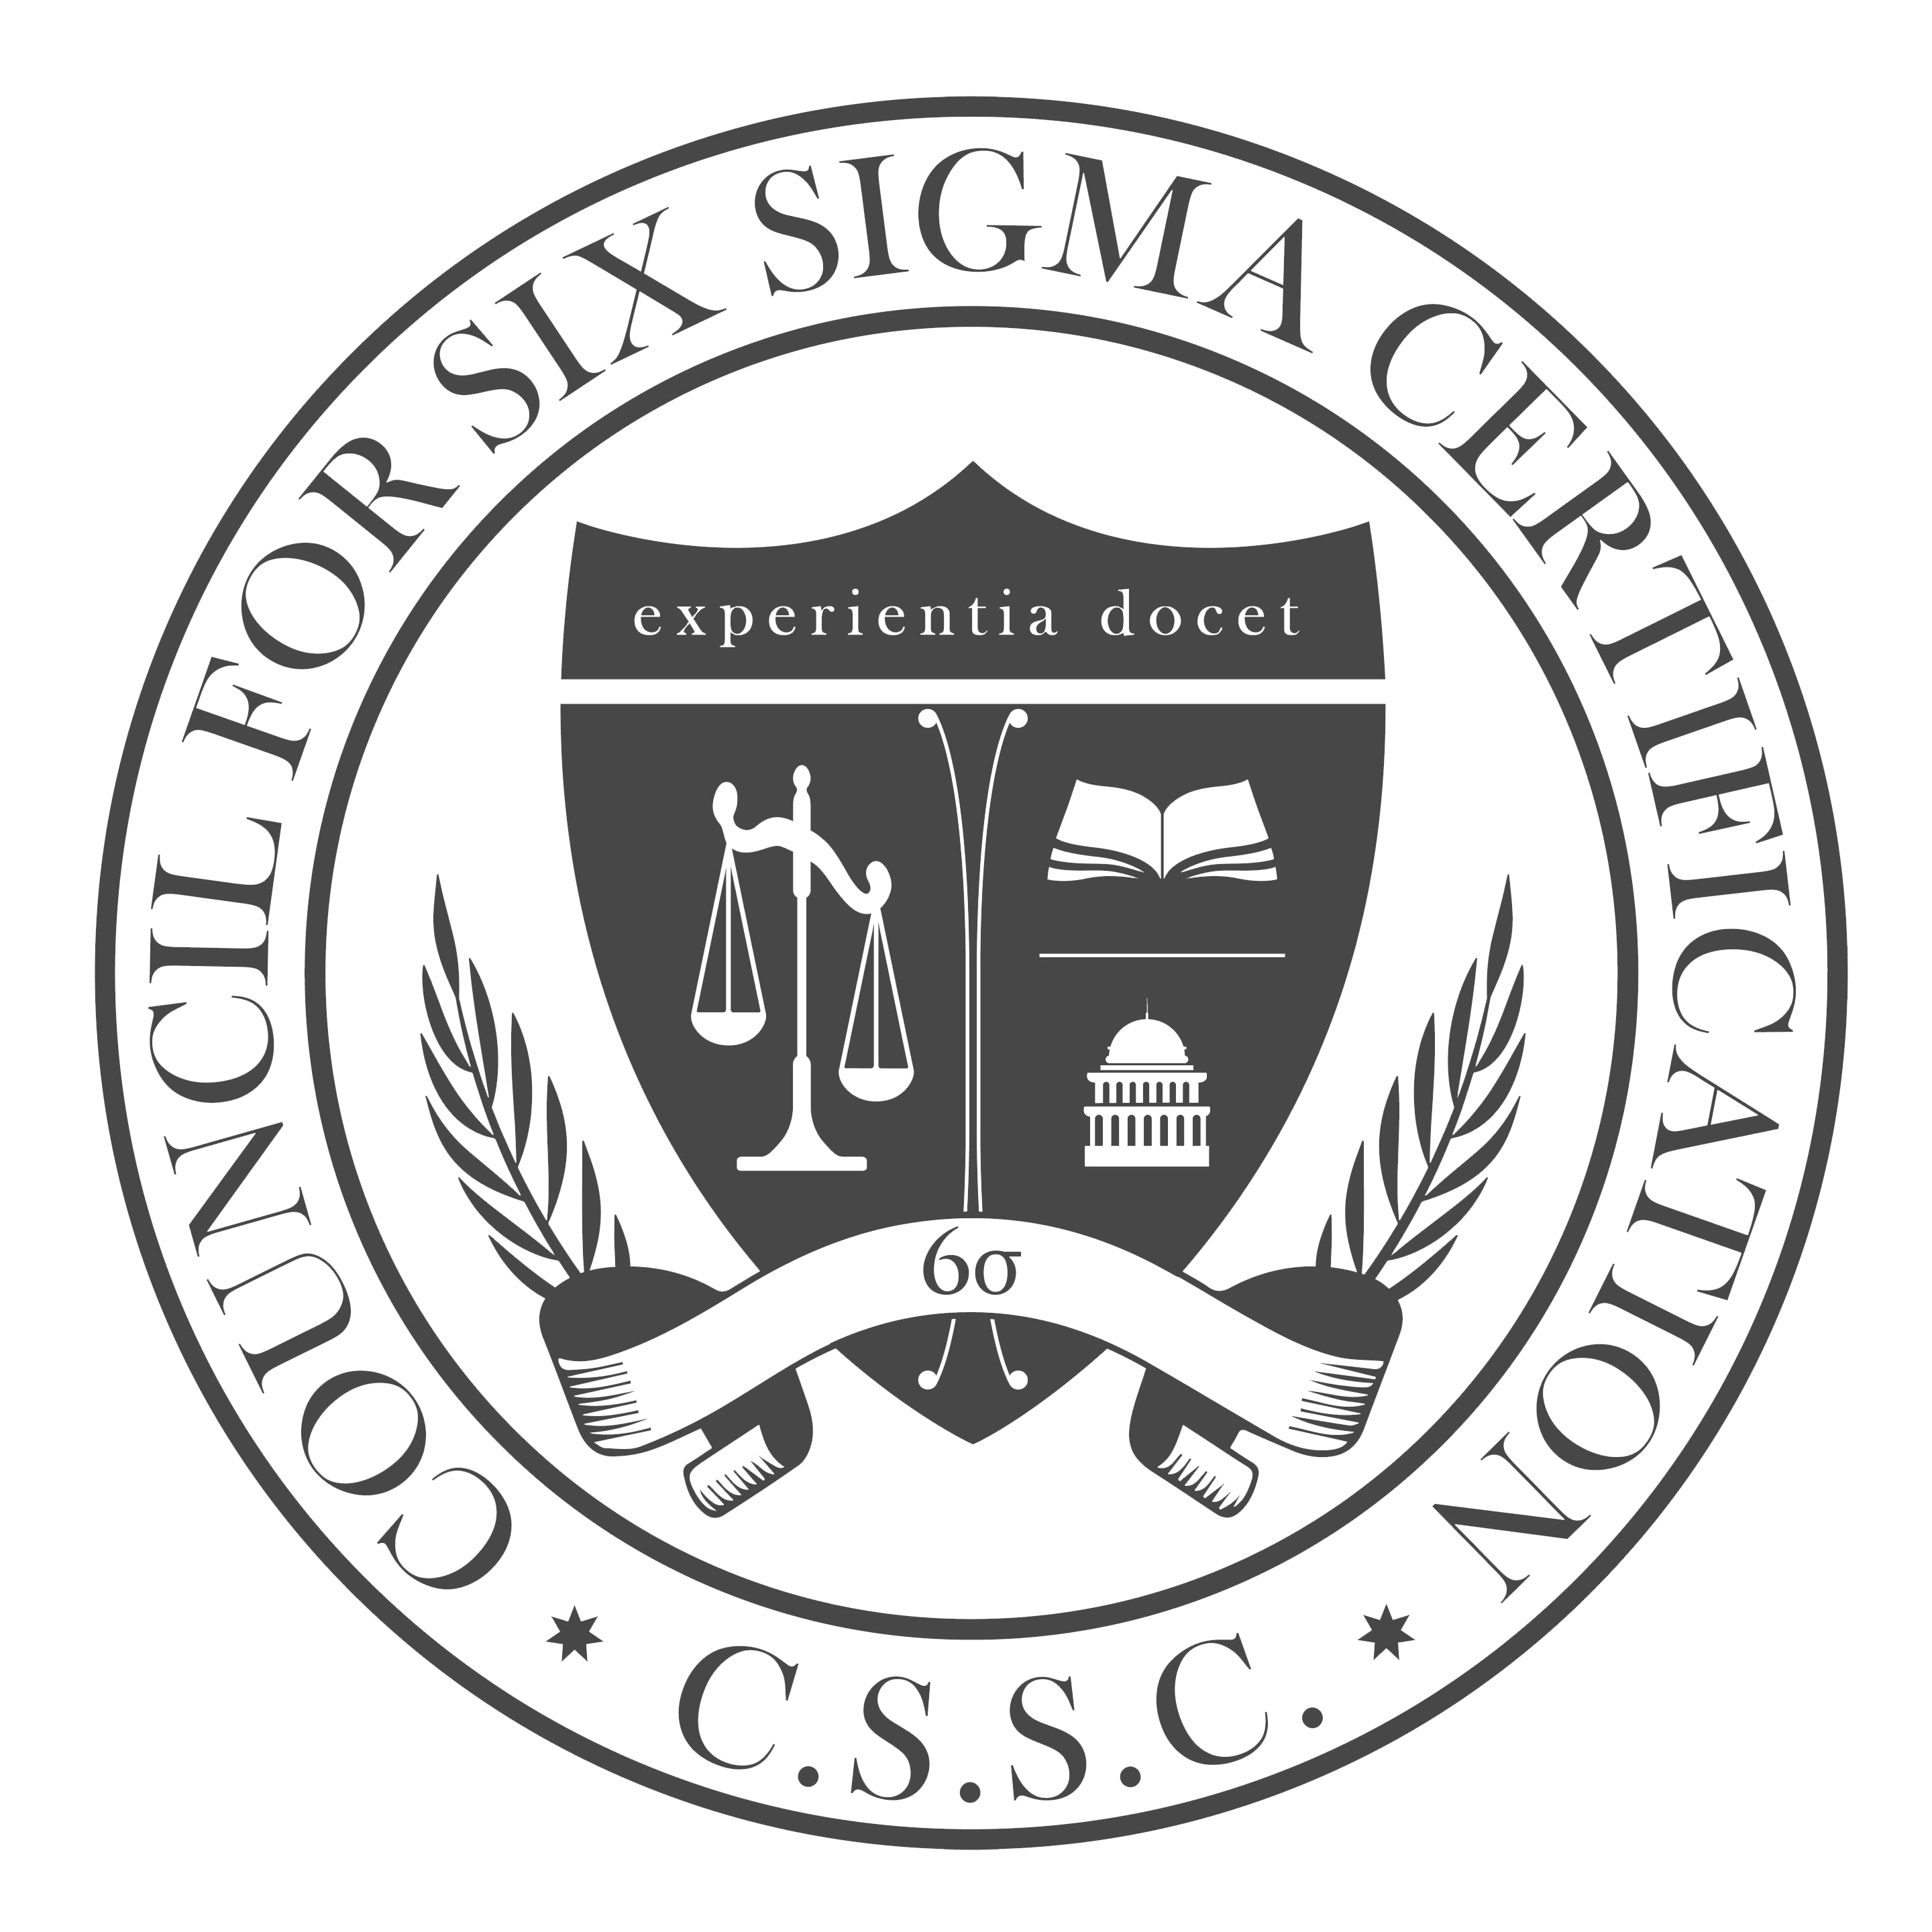 Council for Six Sigma Certification logo